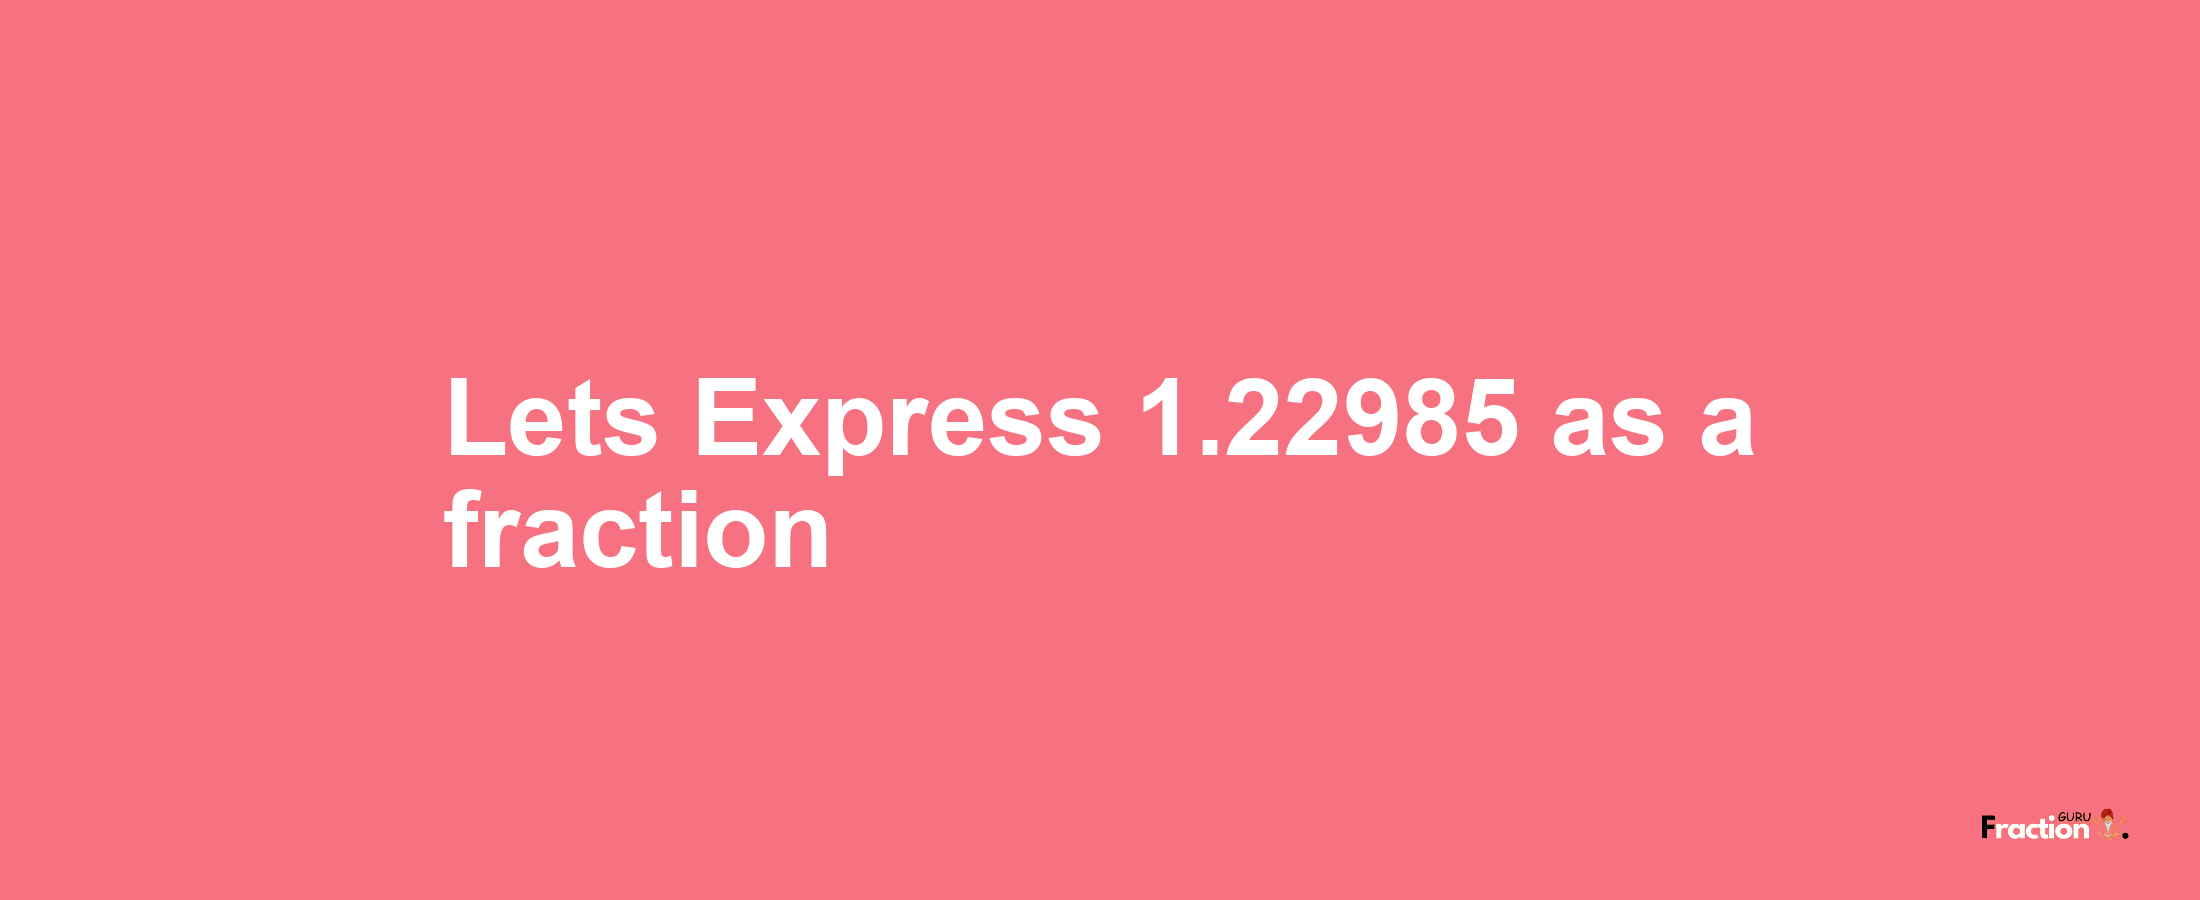 Lets Express 1.22985 as afraction